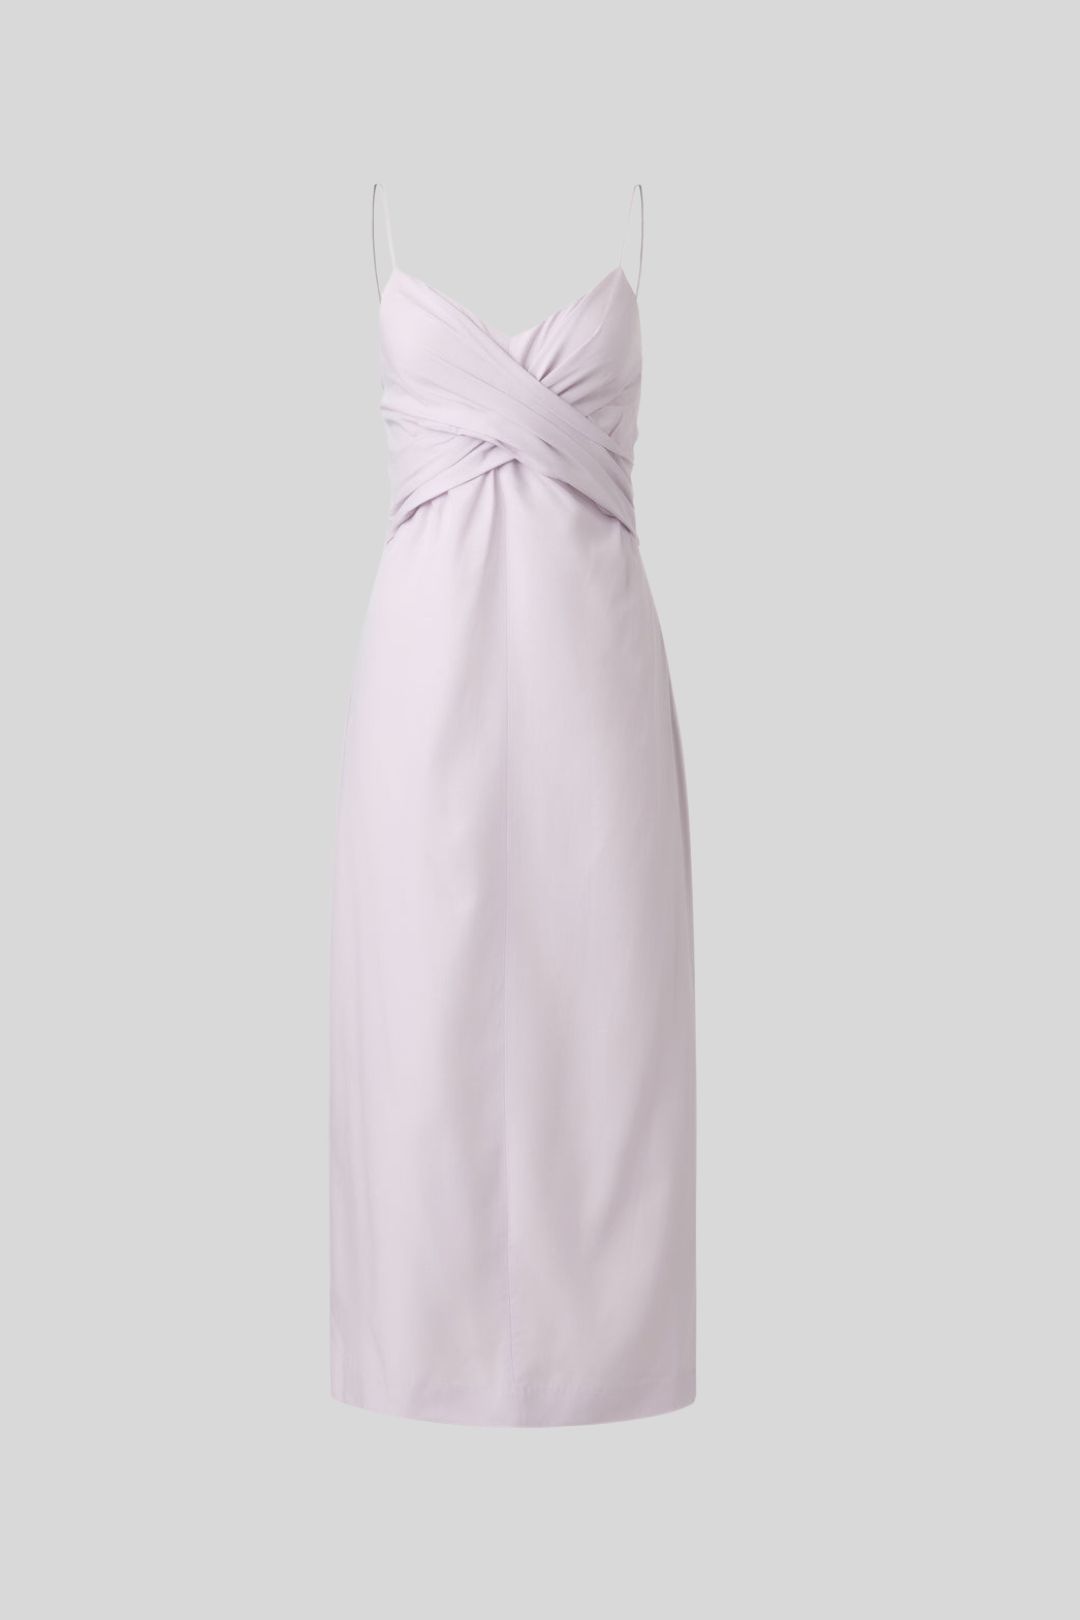 Viktoria and Woods Afterlife Dress in Lilac